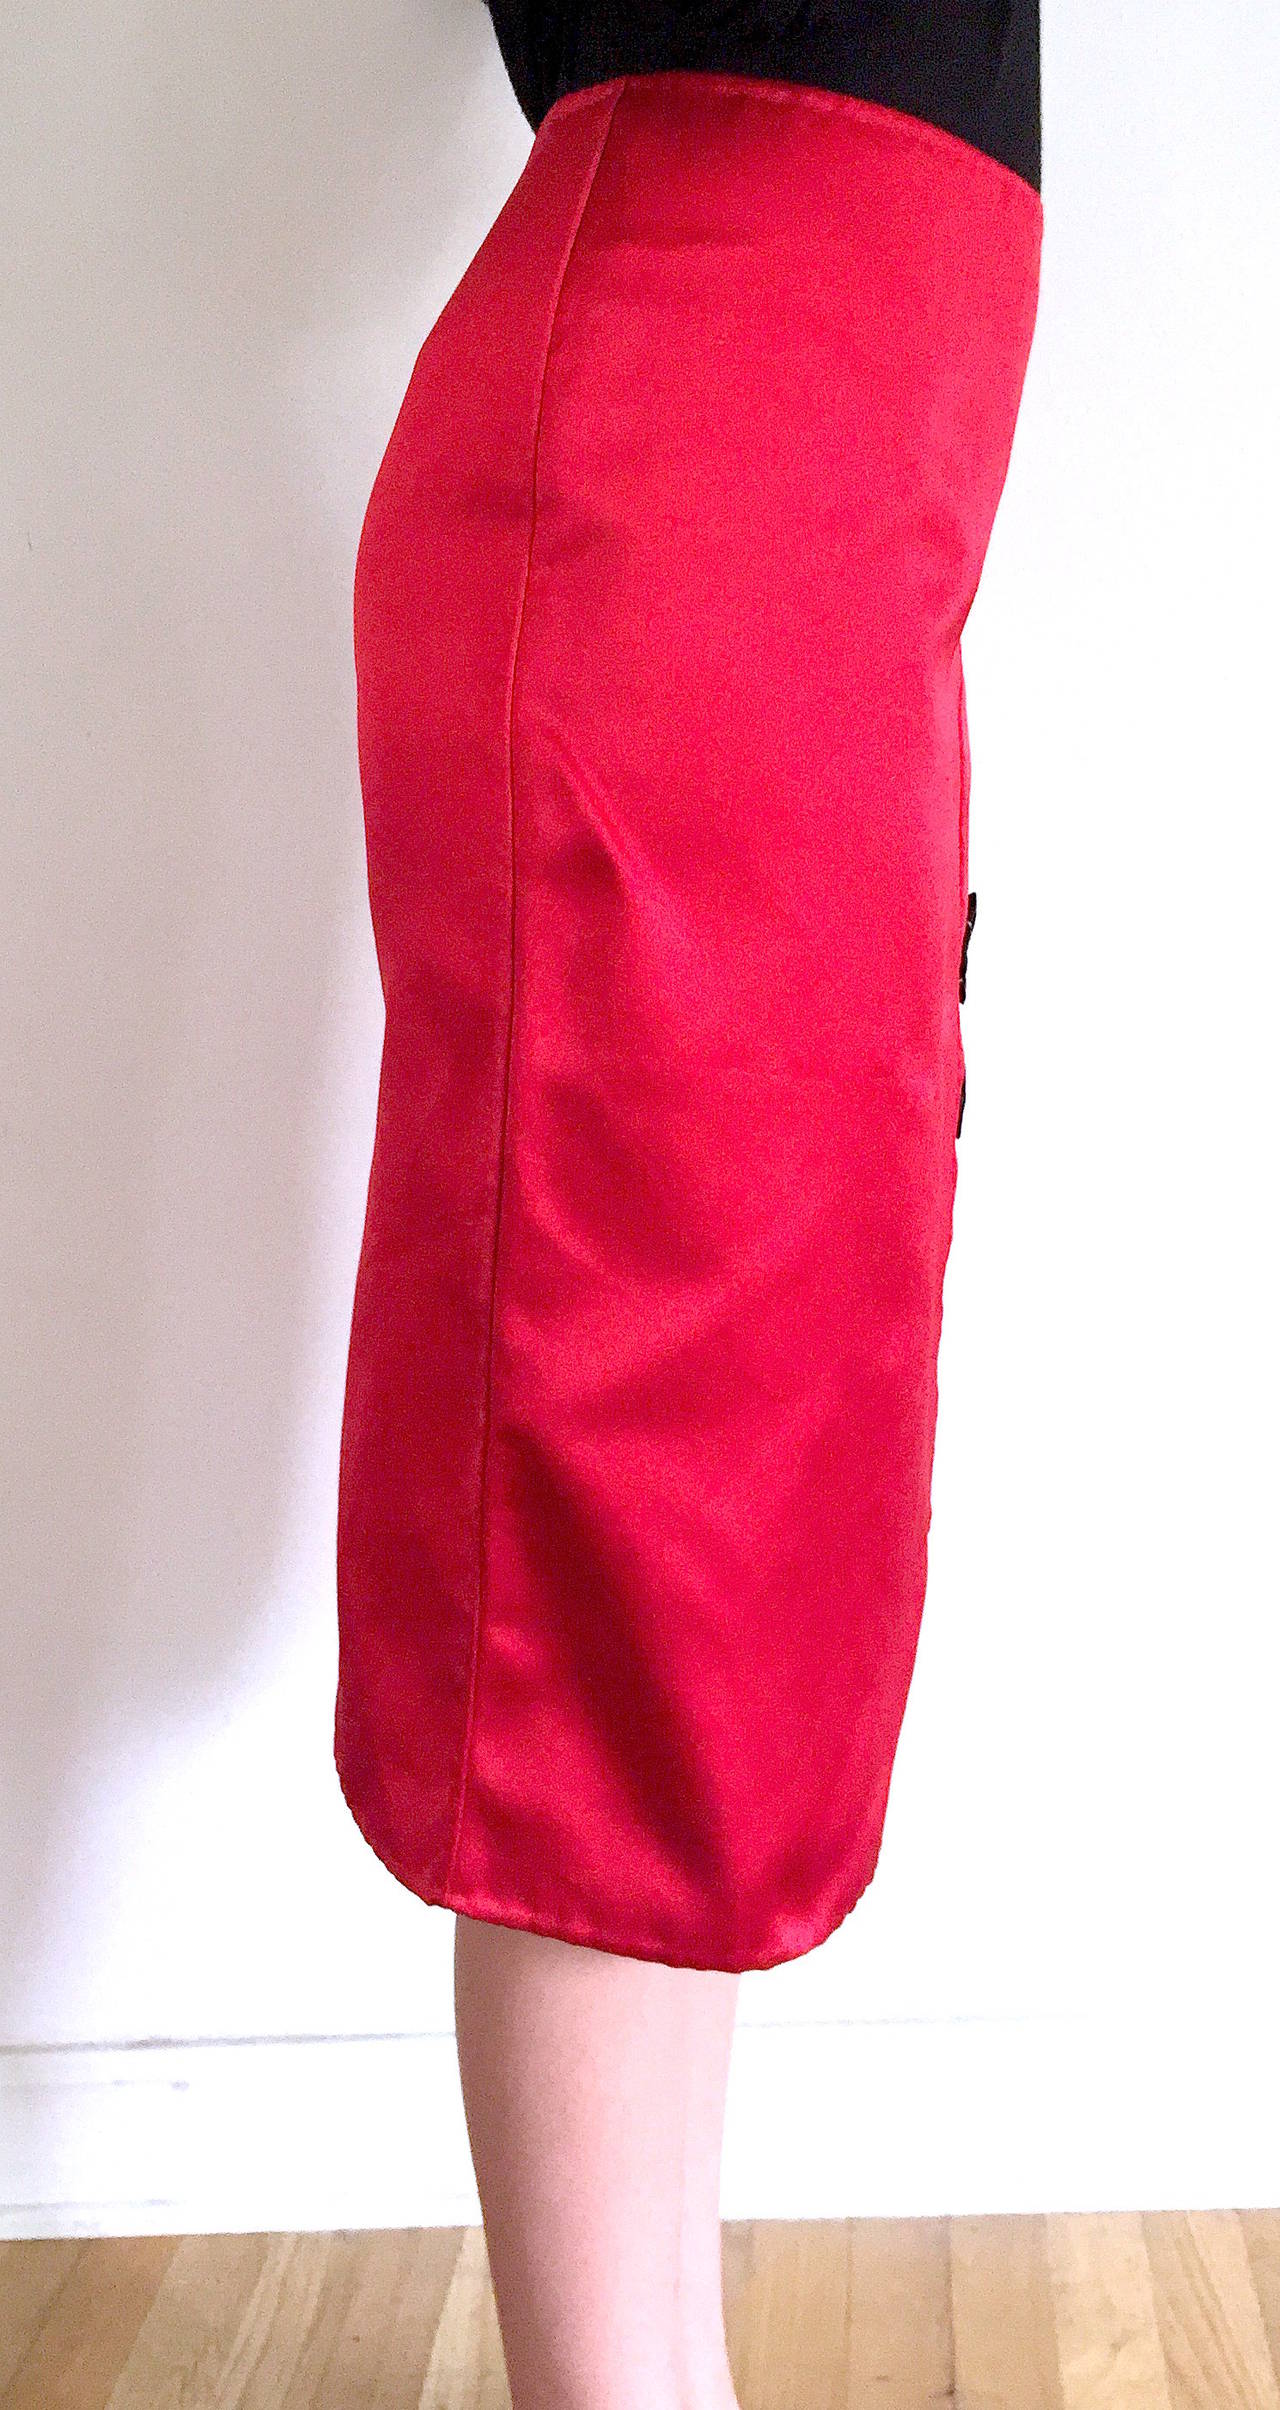 Prada Red Satin Runway Skirt with Flower Applique, IT 40 In Excellent Condition For Sale In Bethesda, MD